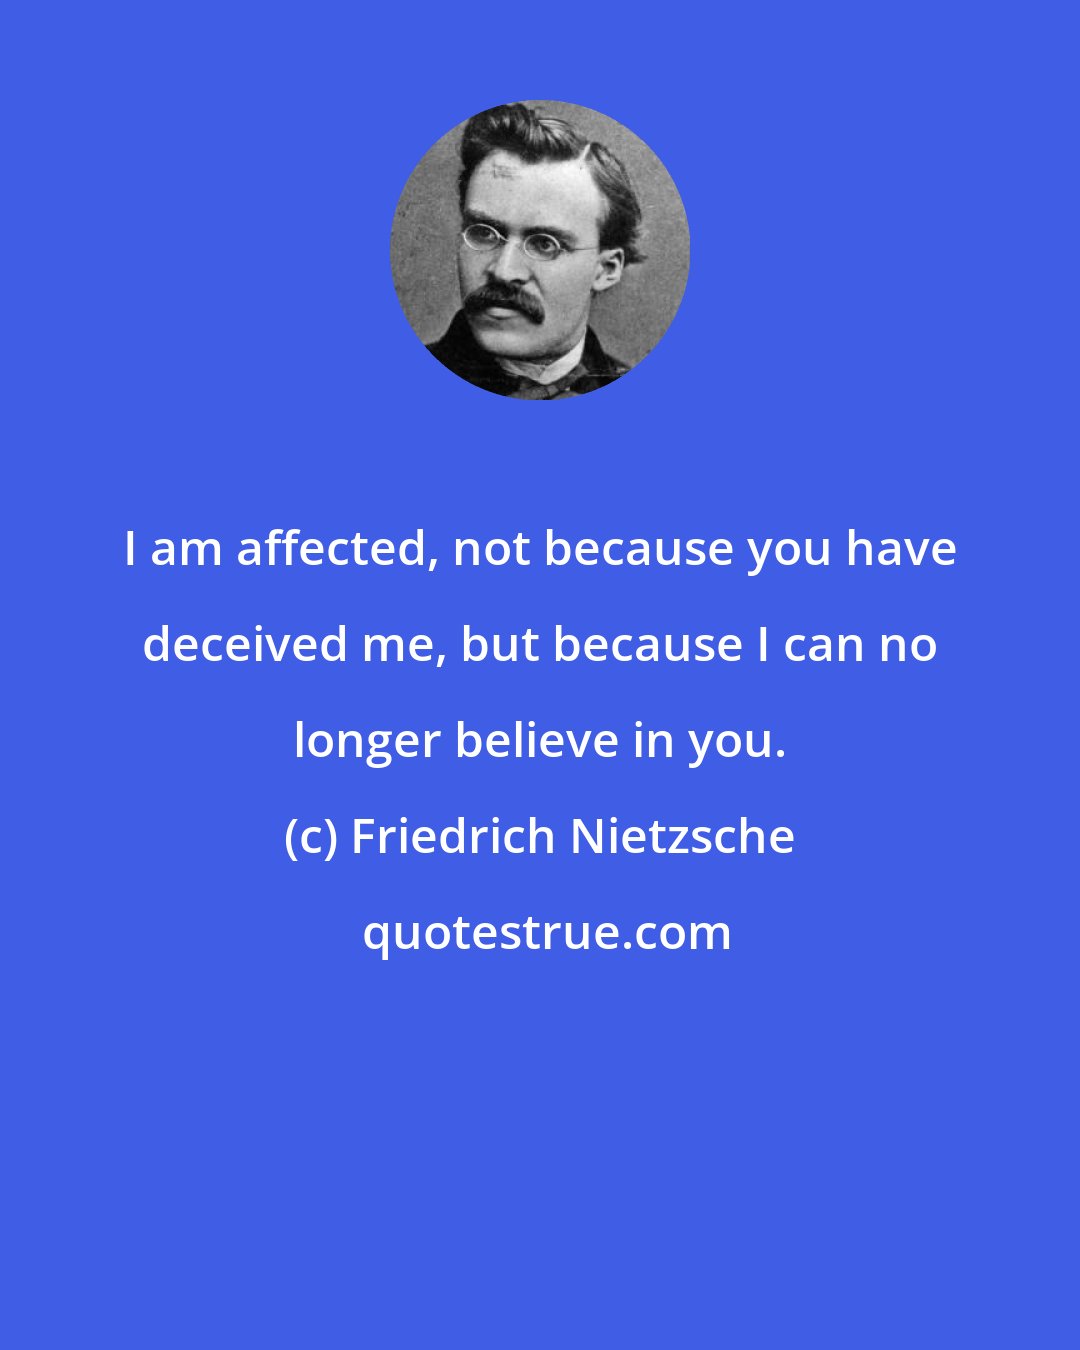 Friedrich Nietzsche: I am affected, not because you have deceived me, but because I can no longer believe in you.